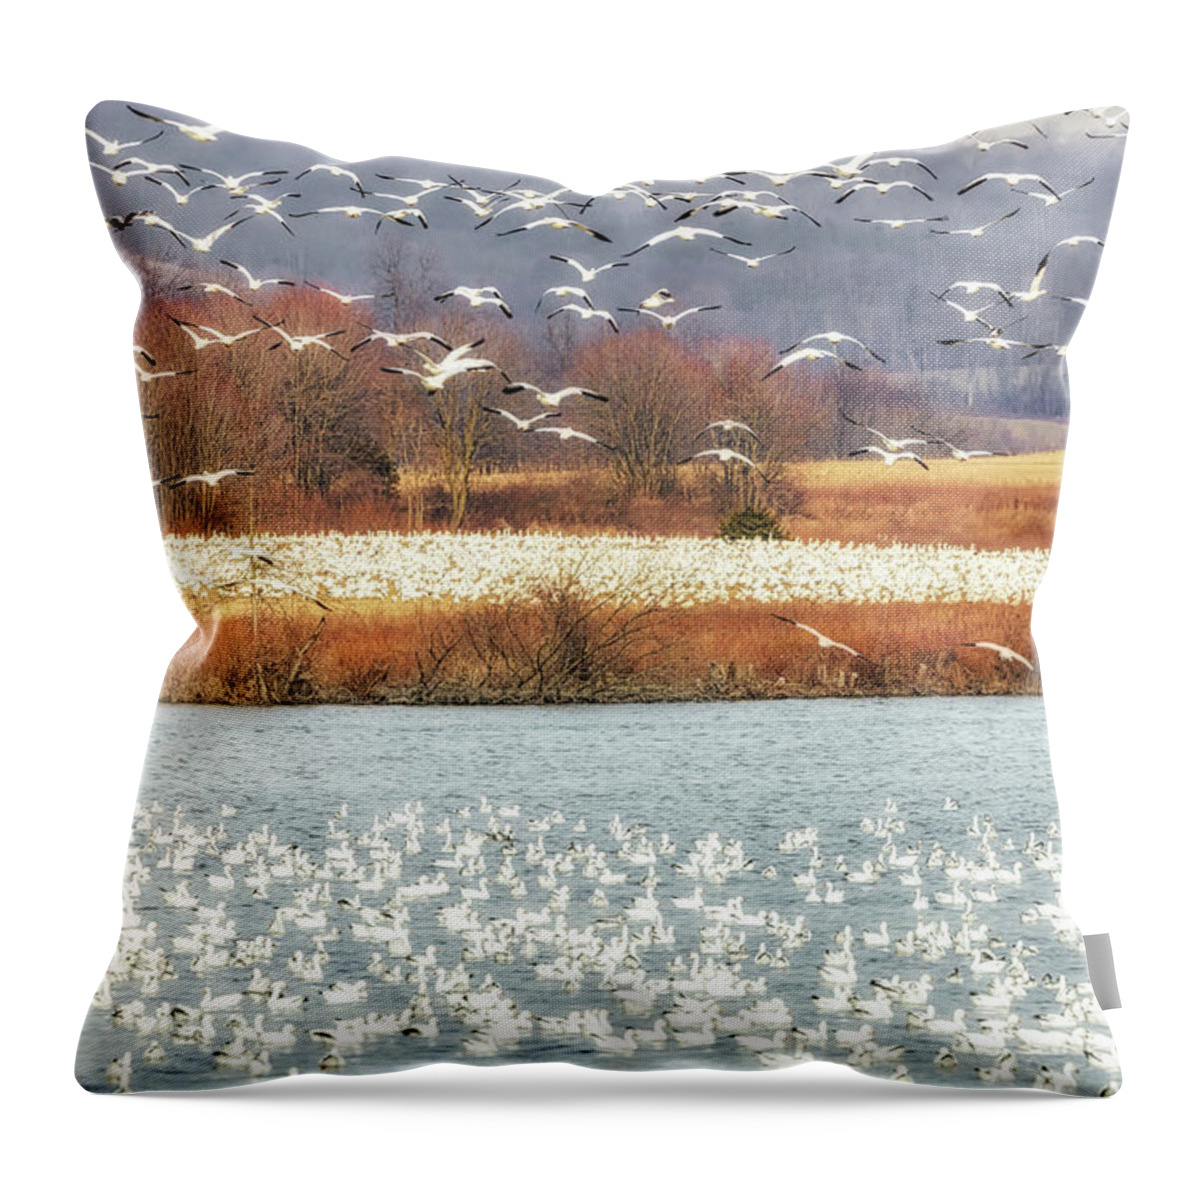 Snow Geese Throw Pillow featuring the photograph Snow Geese Migration by Susan Candelario